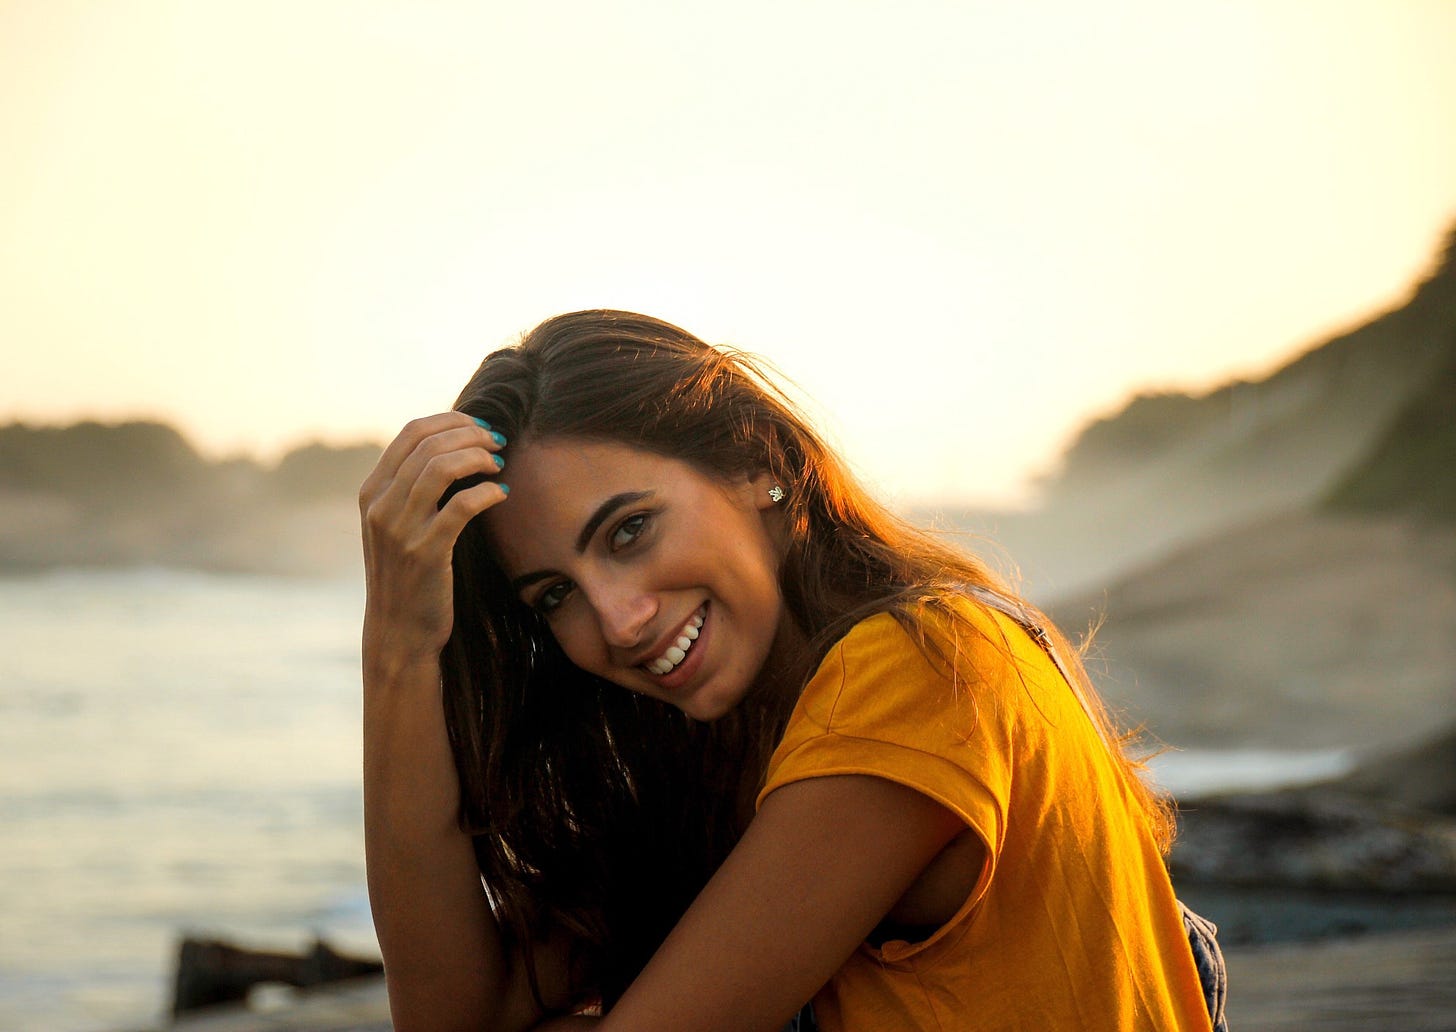 A woman with dark hair smiles at the camera. The sun sets over a beach behind her.